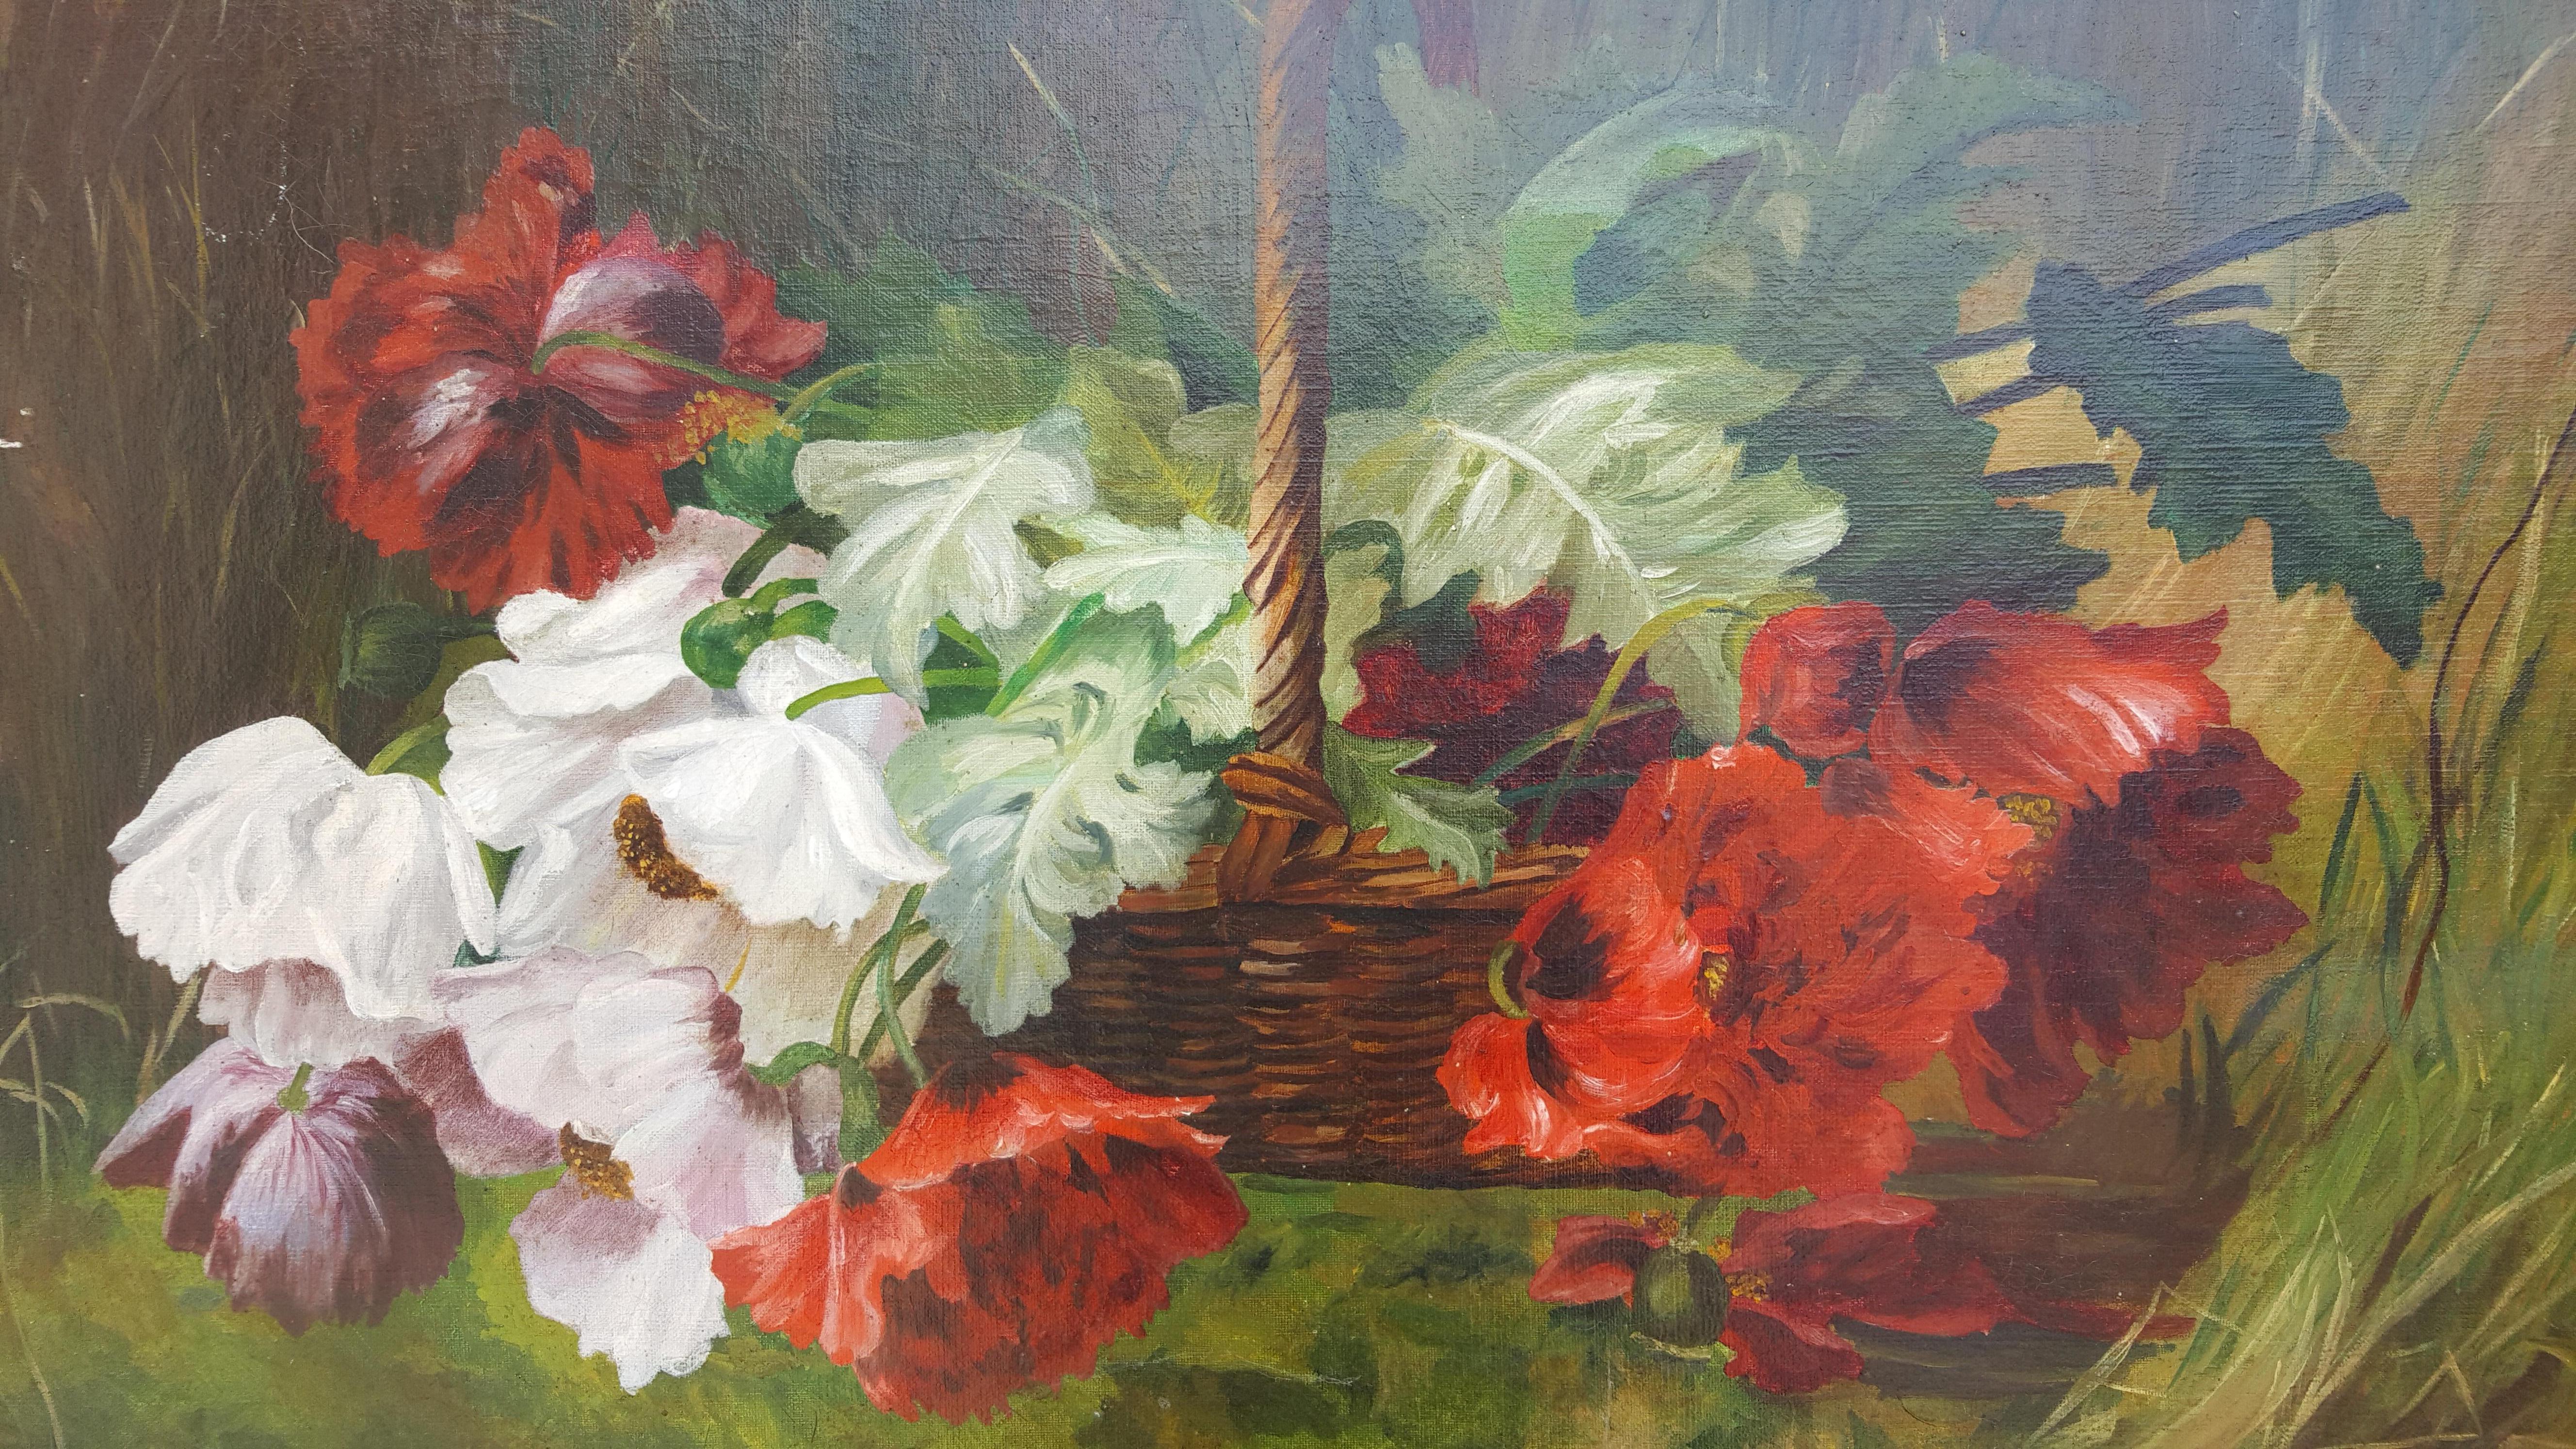  Red Flower Basket  - Painting by Unknown